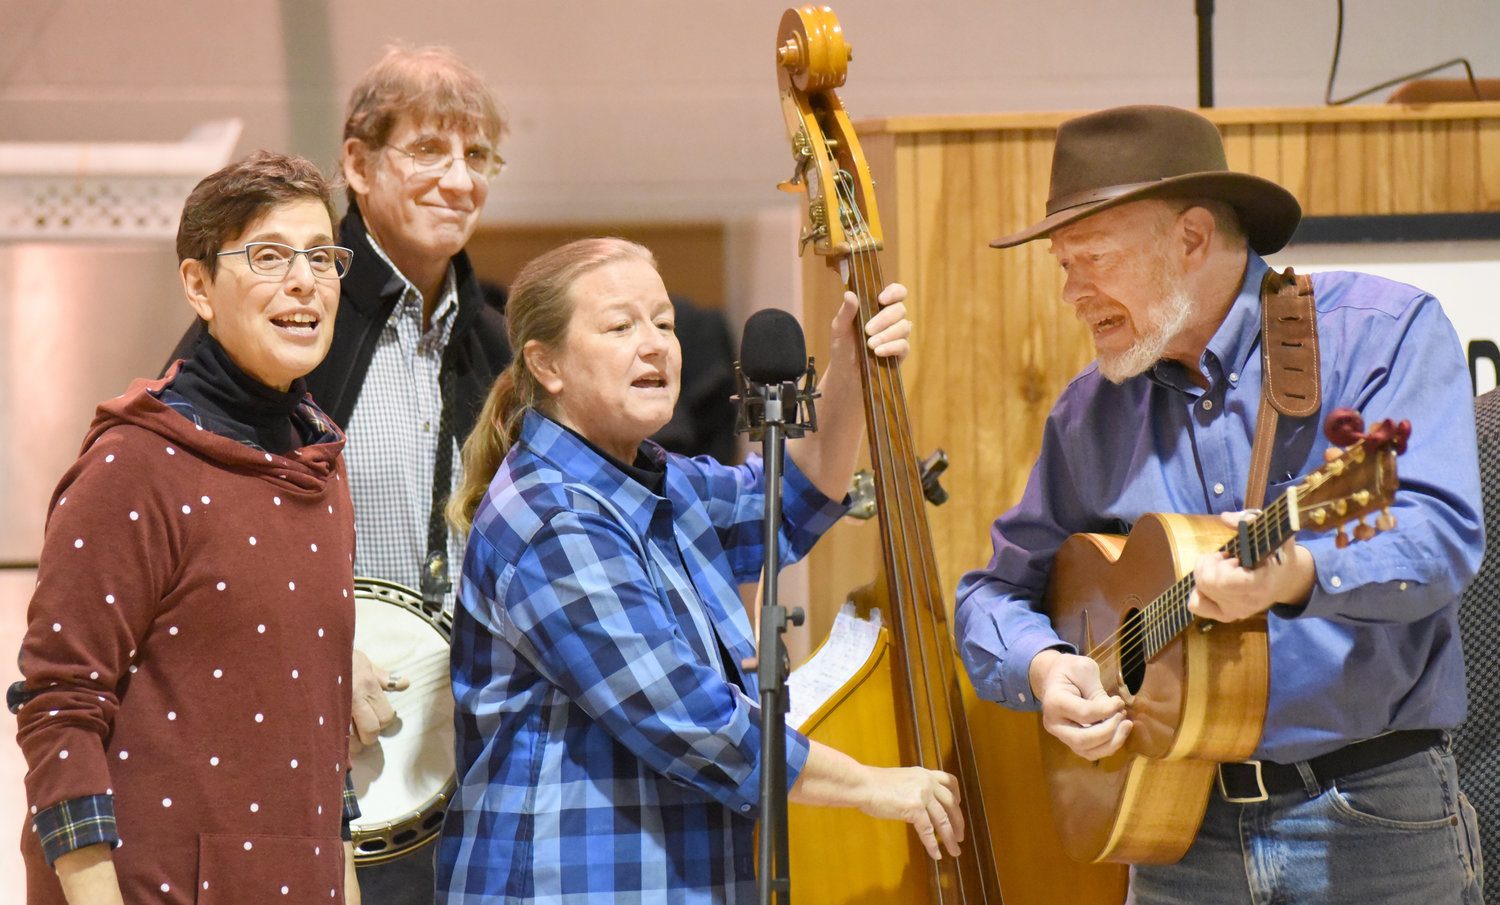 The Great Bluegrass Herons performed prior to the auction Friday night at the Pleasantview Benefit Sale. The group is (from left) Janet Wilson, Paul and Julie Roberts and Mark Wilson.